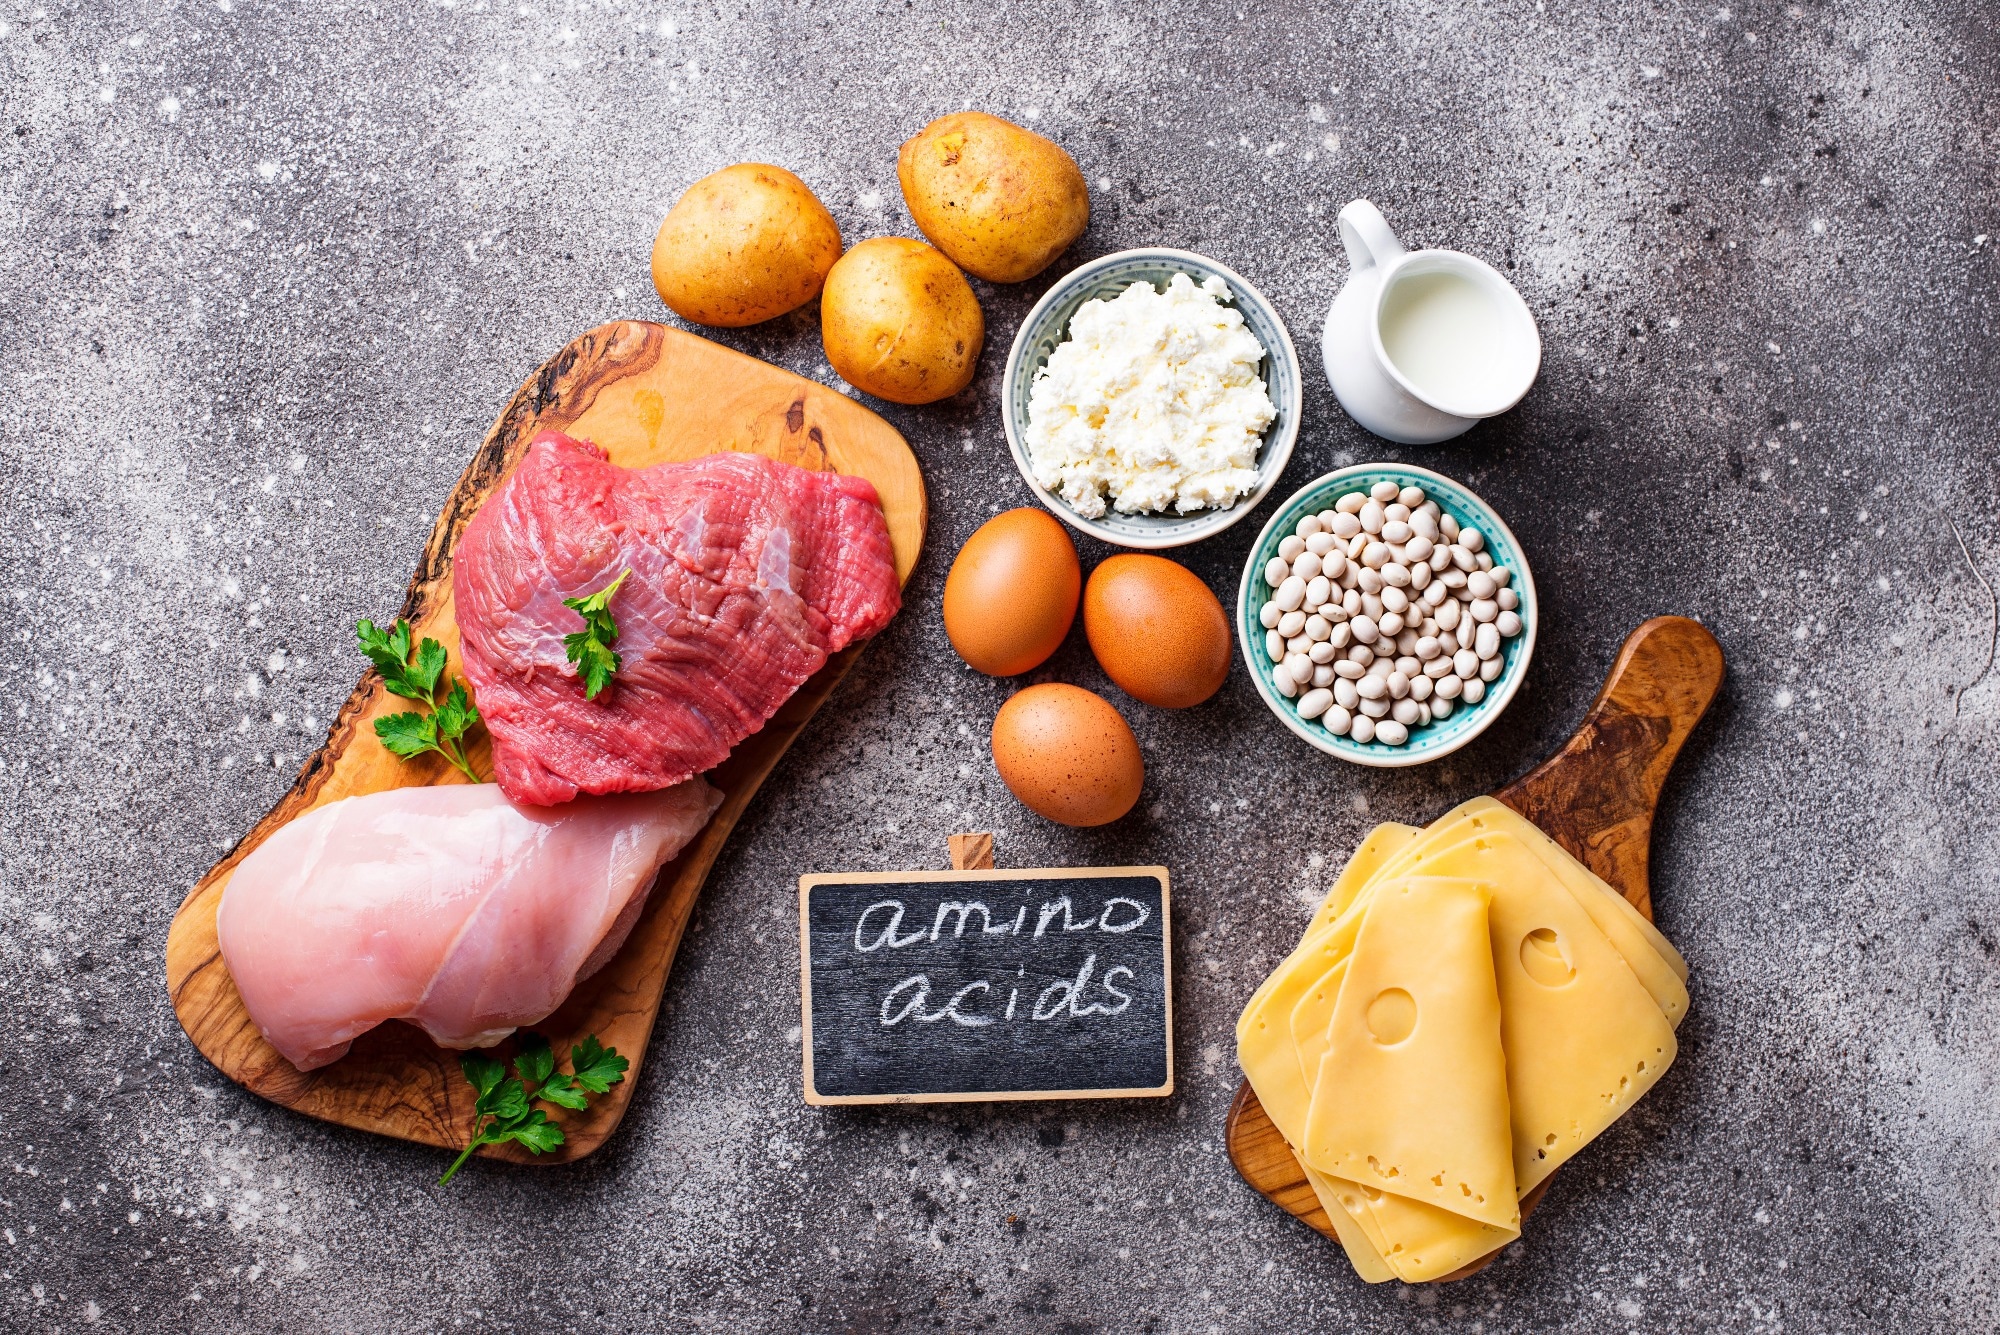 Study: The association between dietary amino acid profile and the risk of type 2 diabetes: Ravansar non-communicable disease cohort study. Image Credit: Yulia Furman/Shutterstock.com